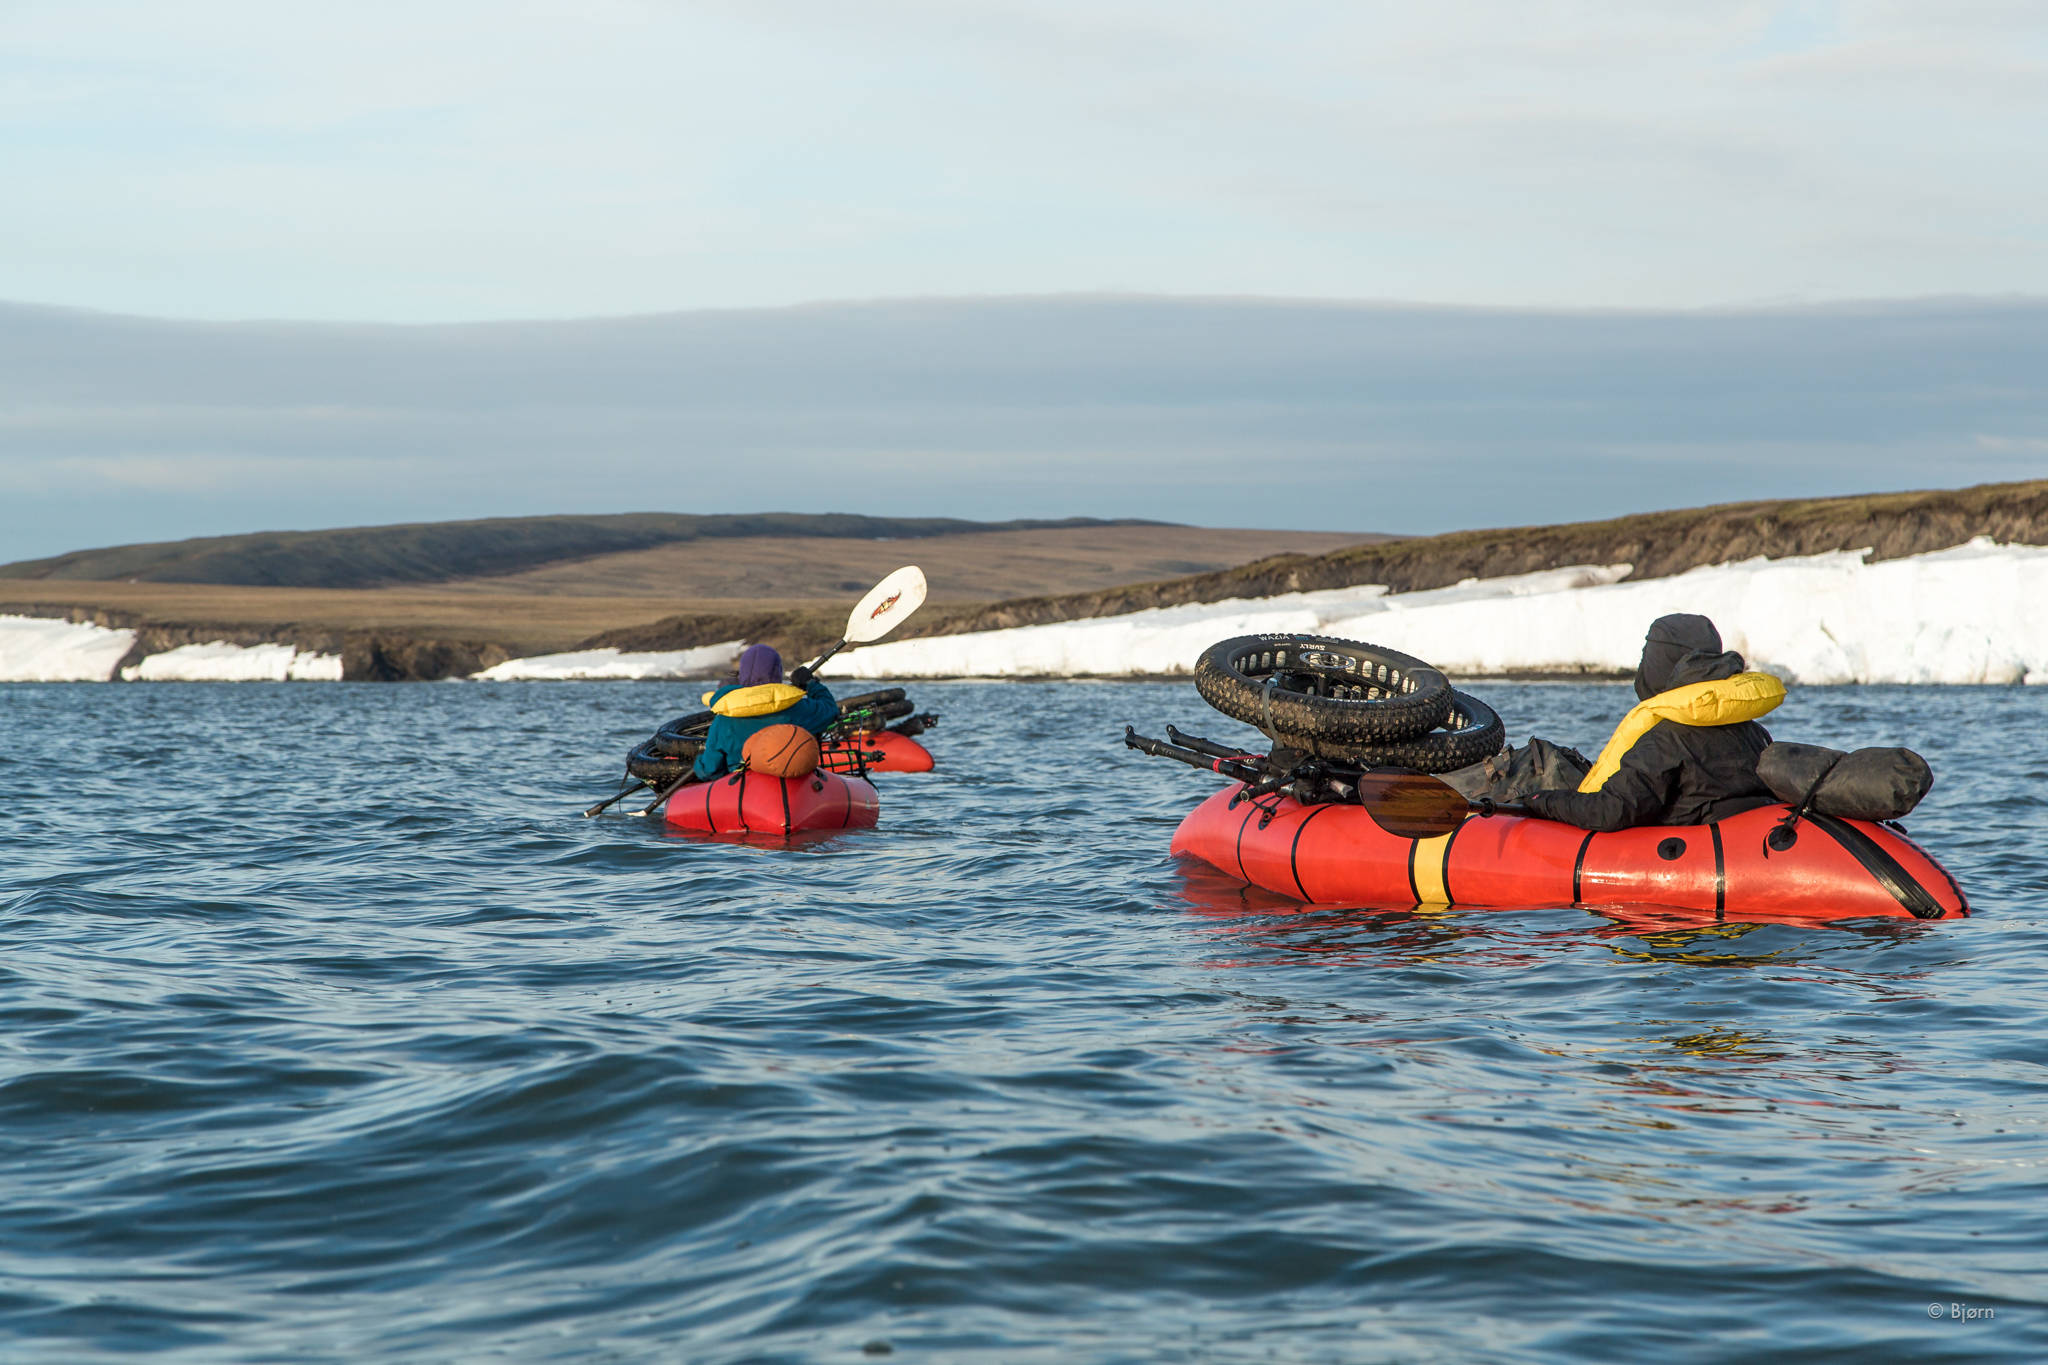 Along sectins of the coast where snow drifts clogged the beach, the Roof of the Arctic group had to paddle in pack rafts around the barriers. (Photo courtesy Bjørn Olson)